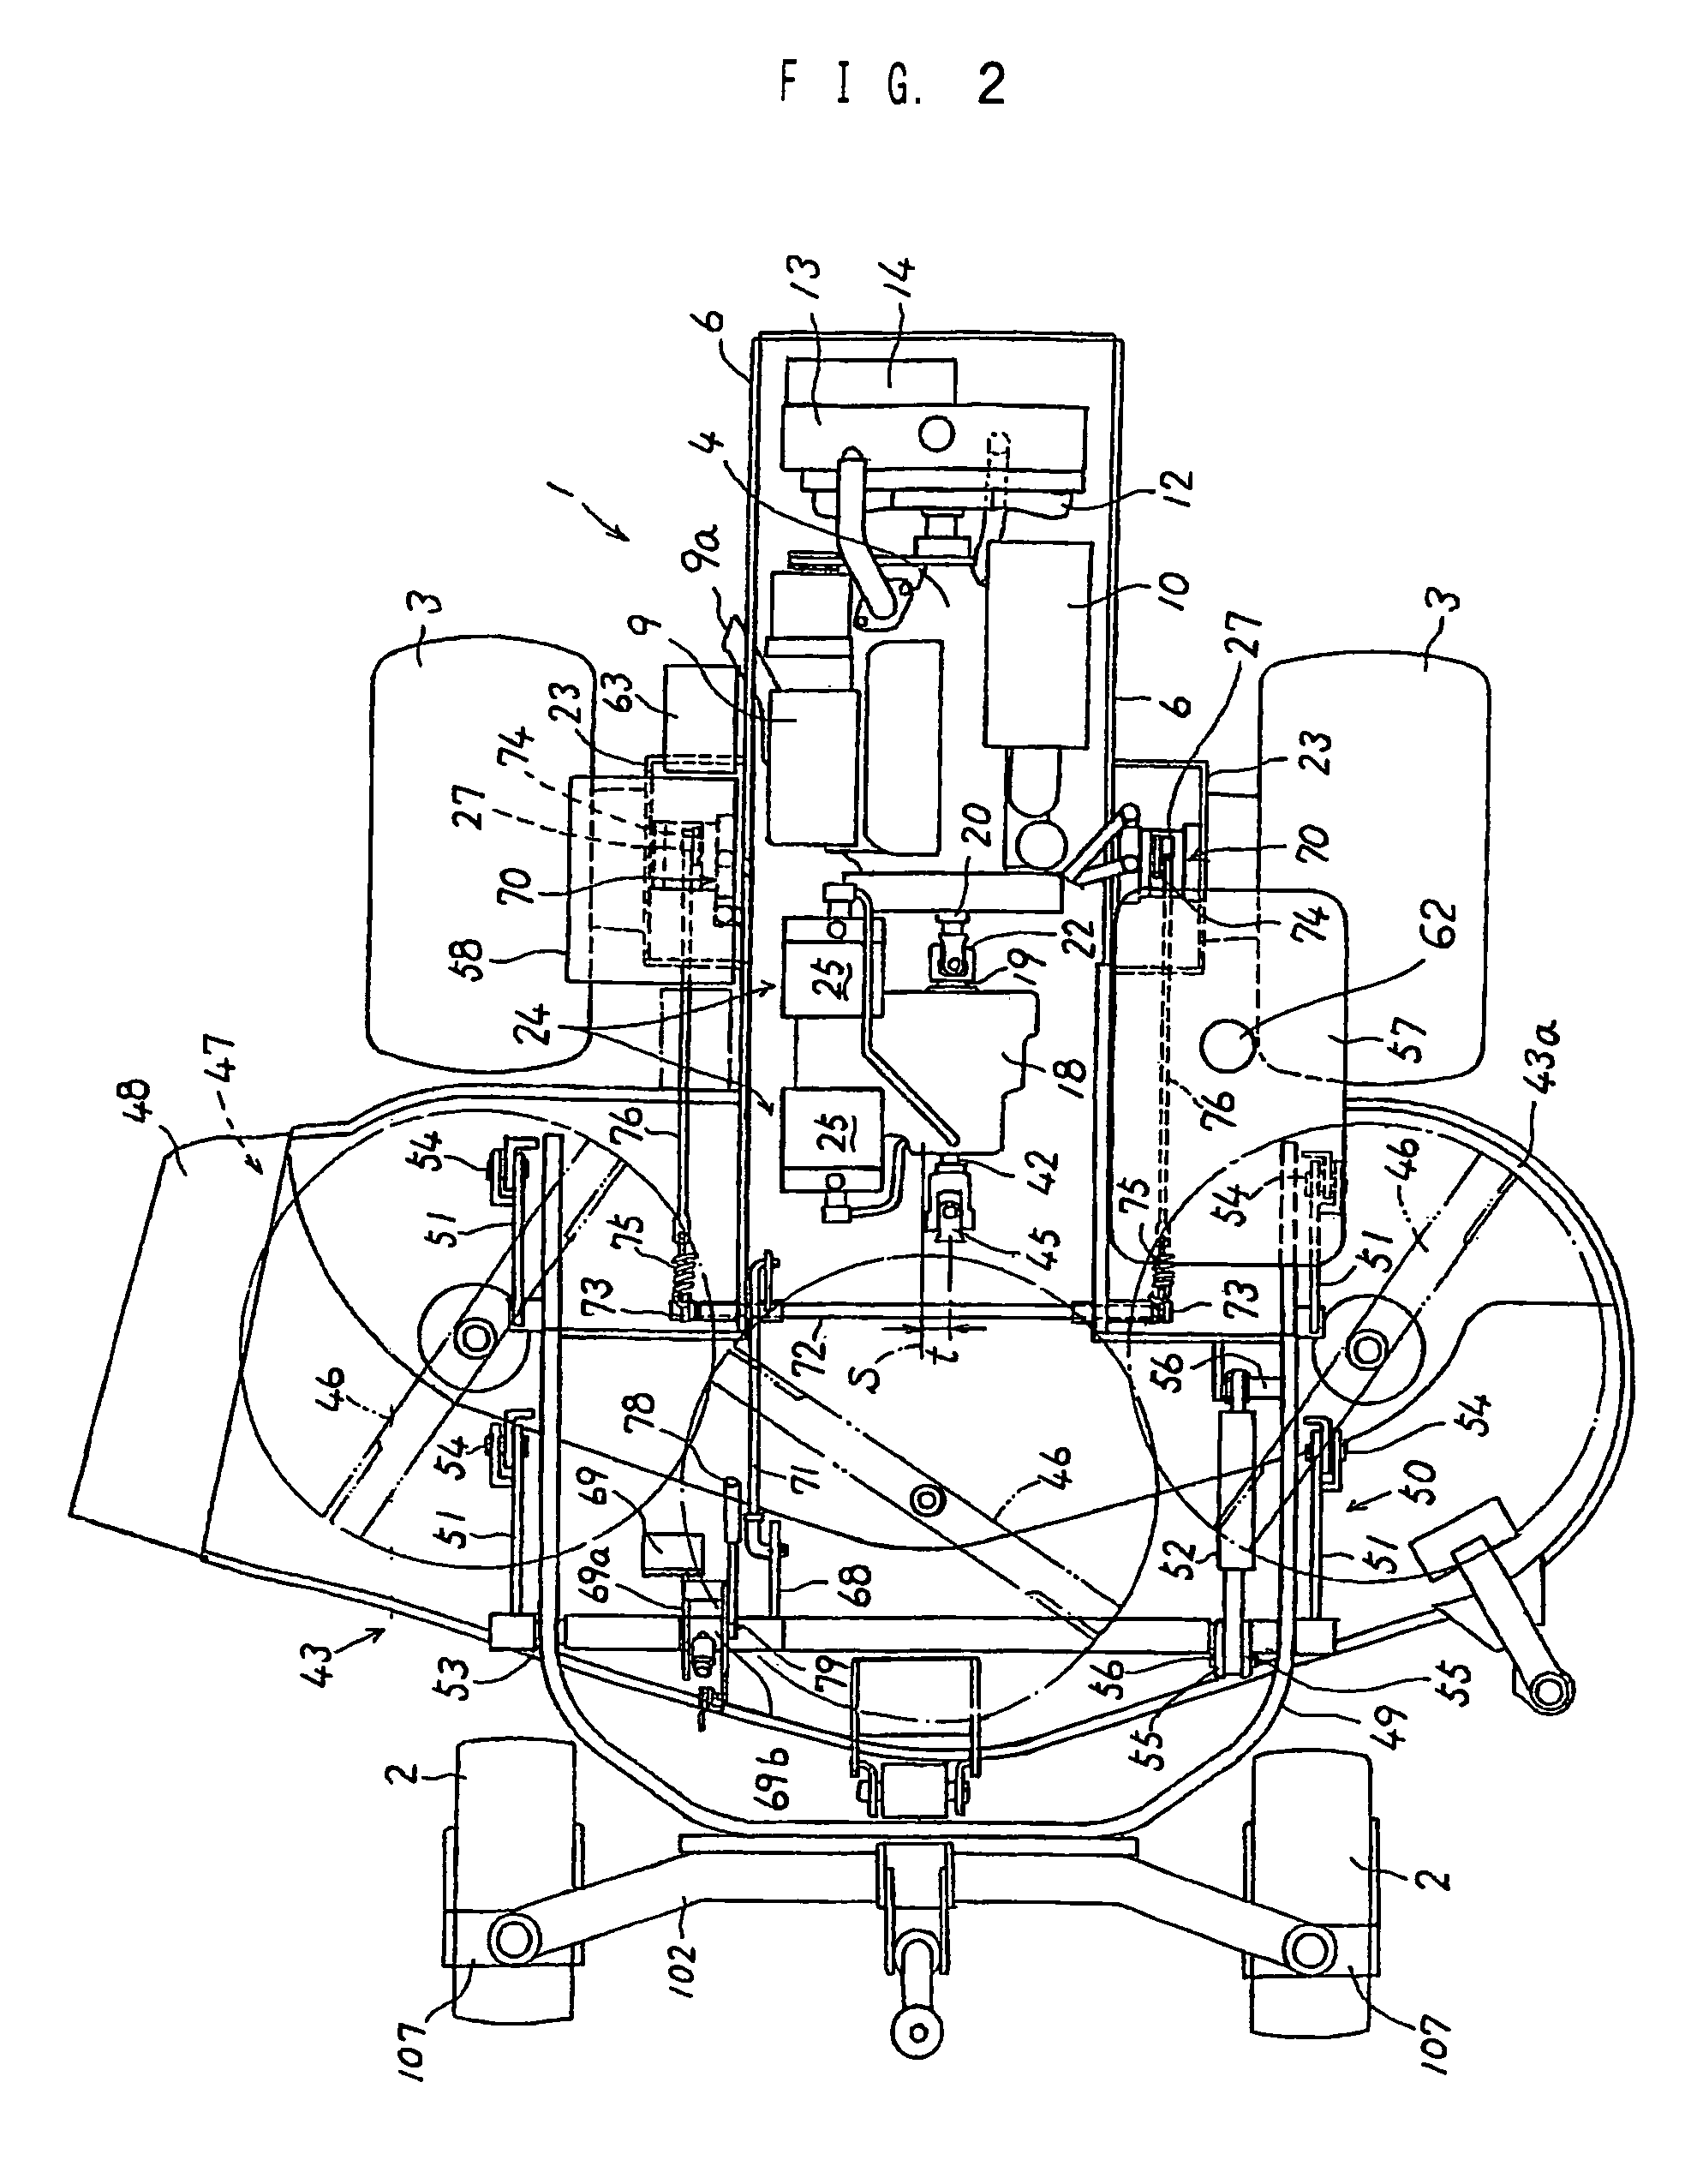 Riding mower provided with hydrostatic transmissions